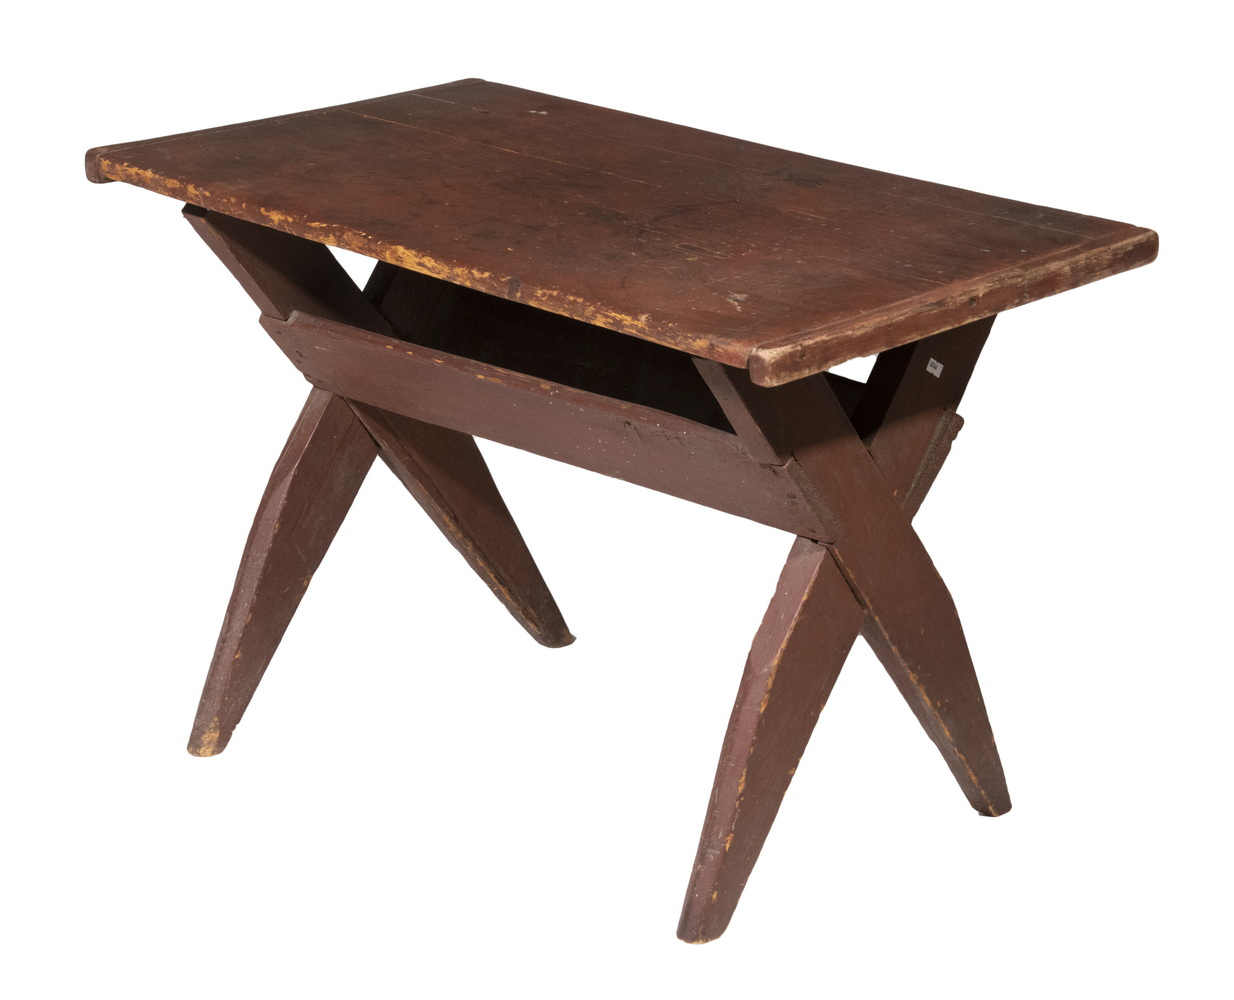 EARLY SAWBUCK TABLE 18th c. Small